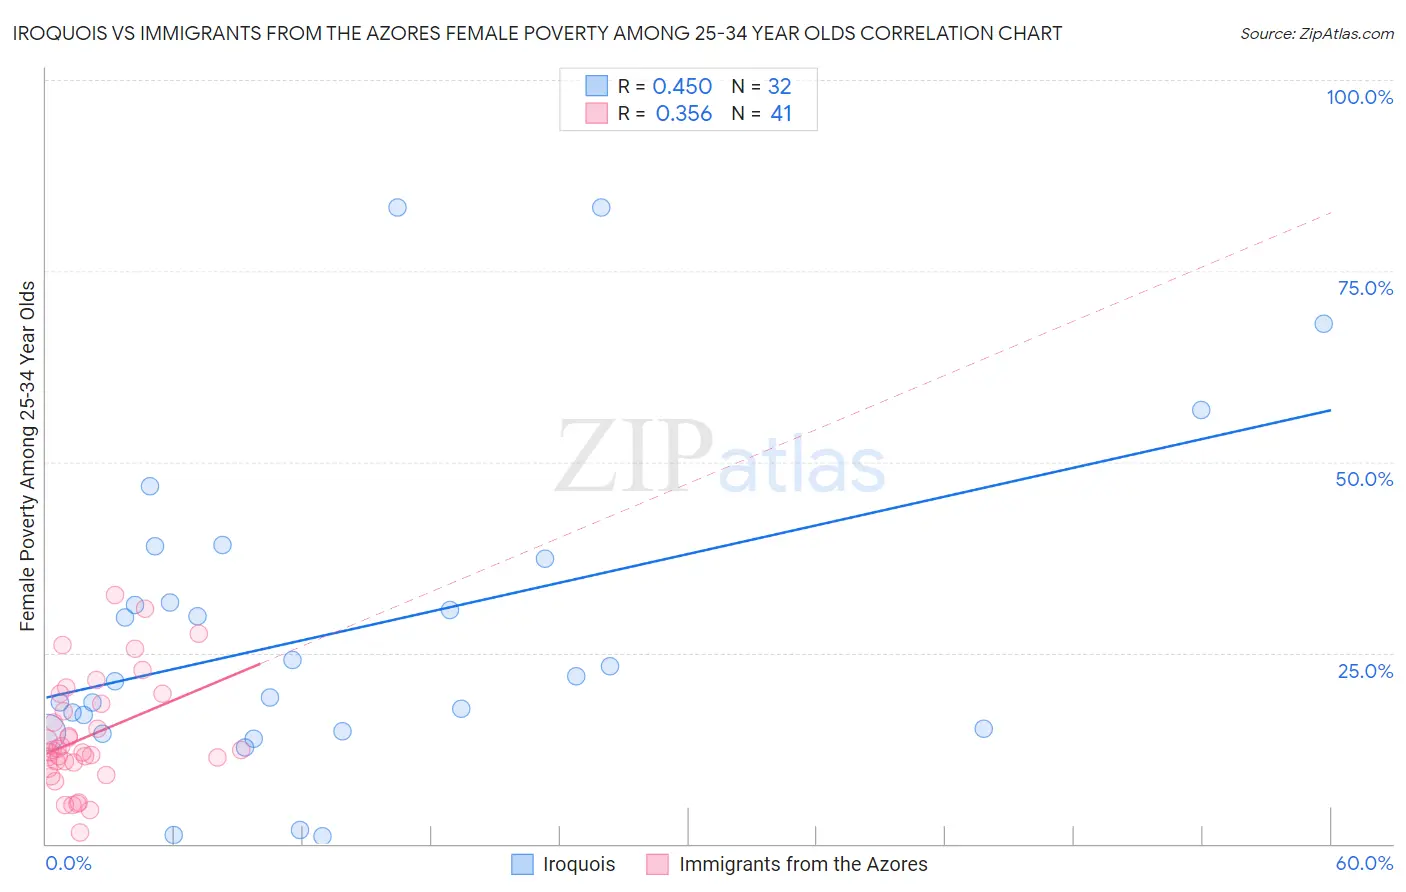 Iroquois vs Immigrants from the Azores Female Poverty Among 25-34 Year Olds